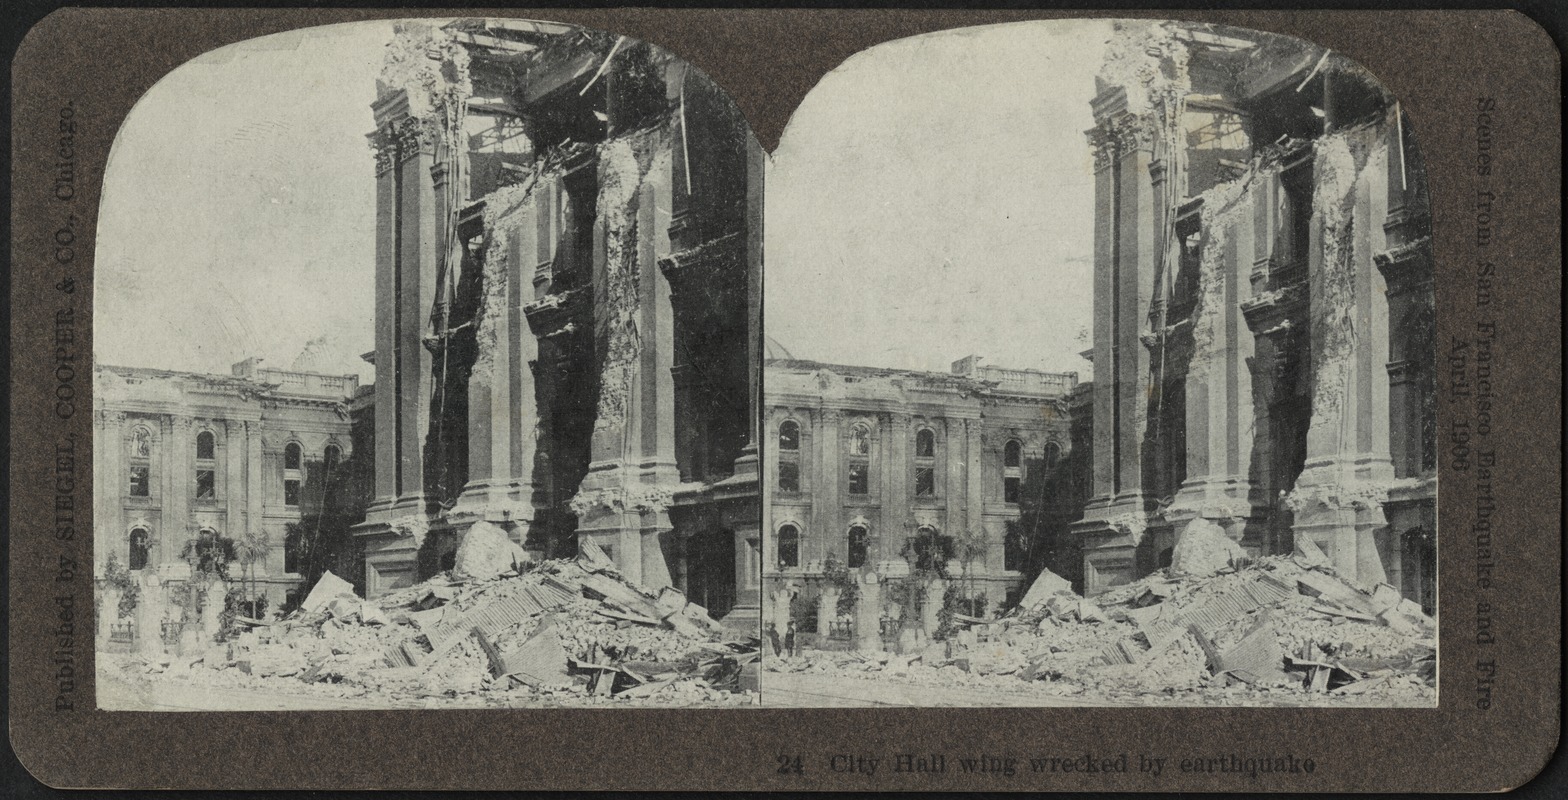 City Hall wing wrecked by earthquake